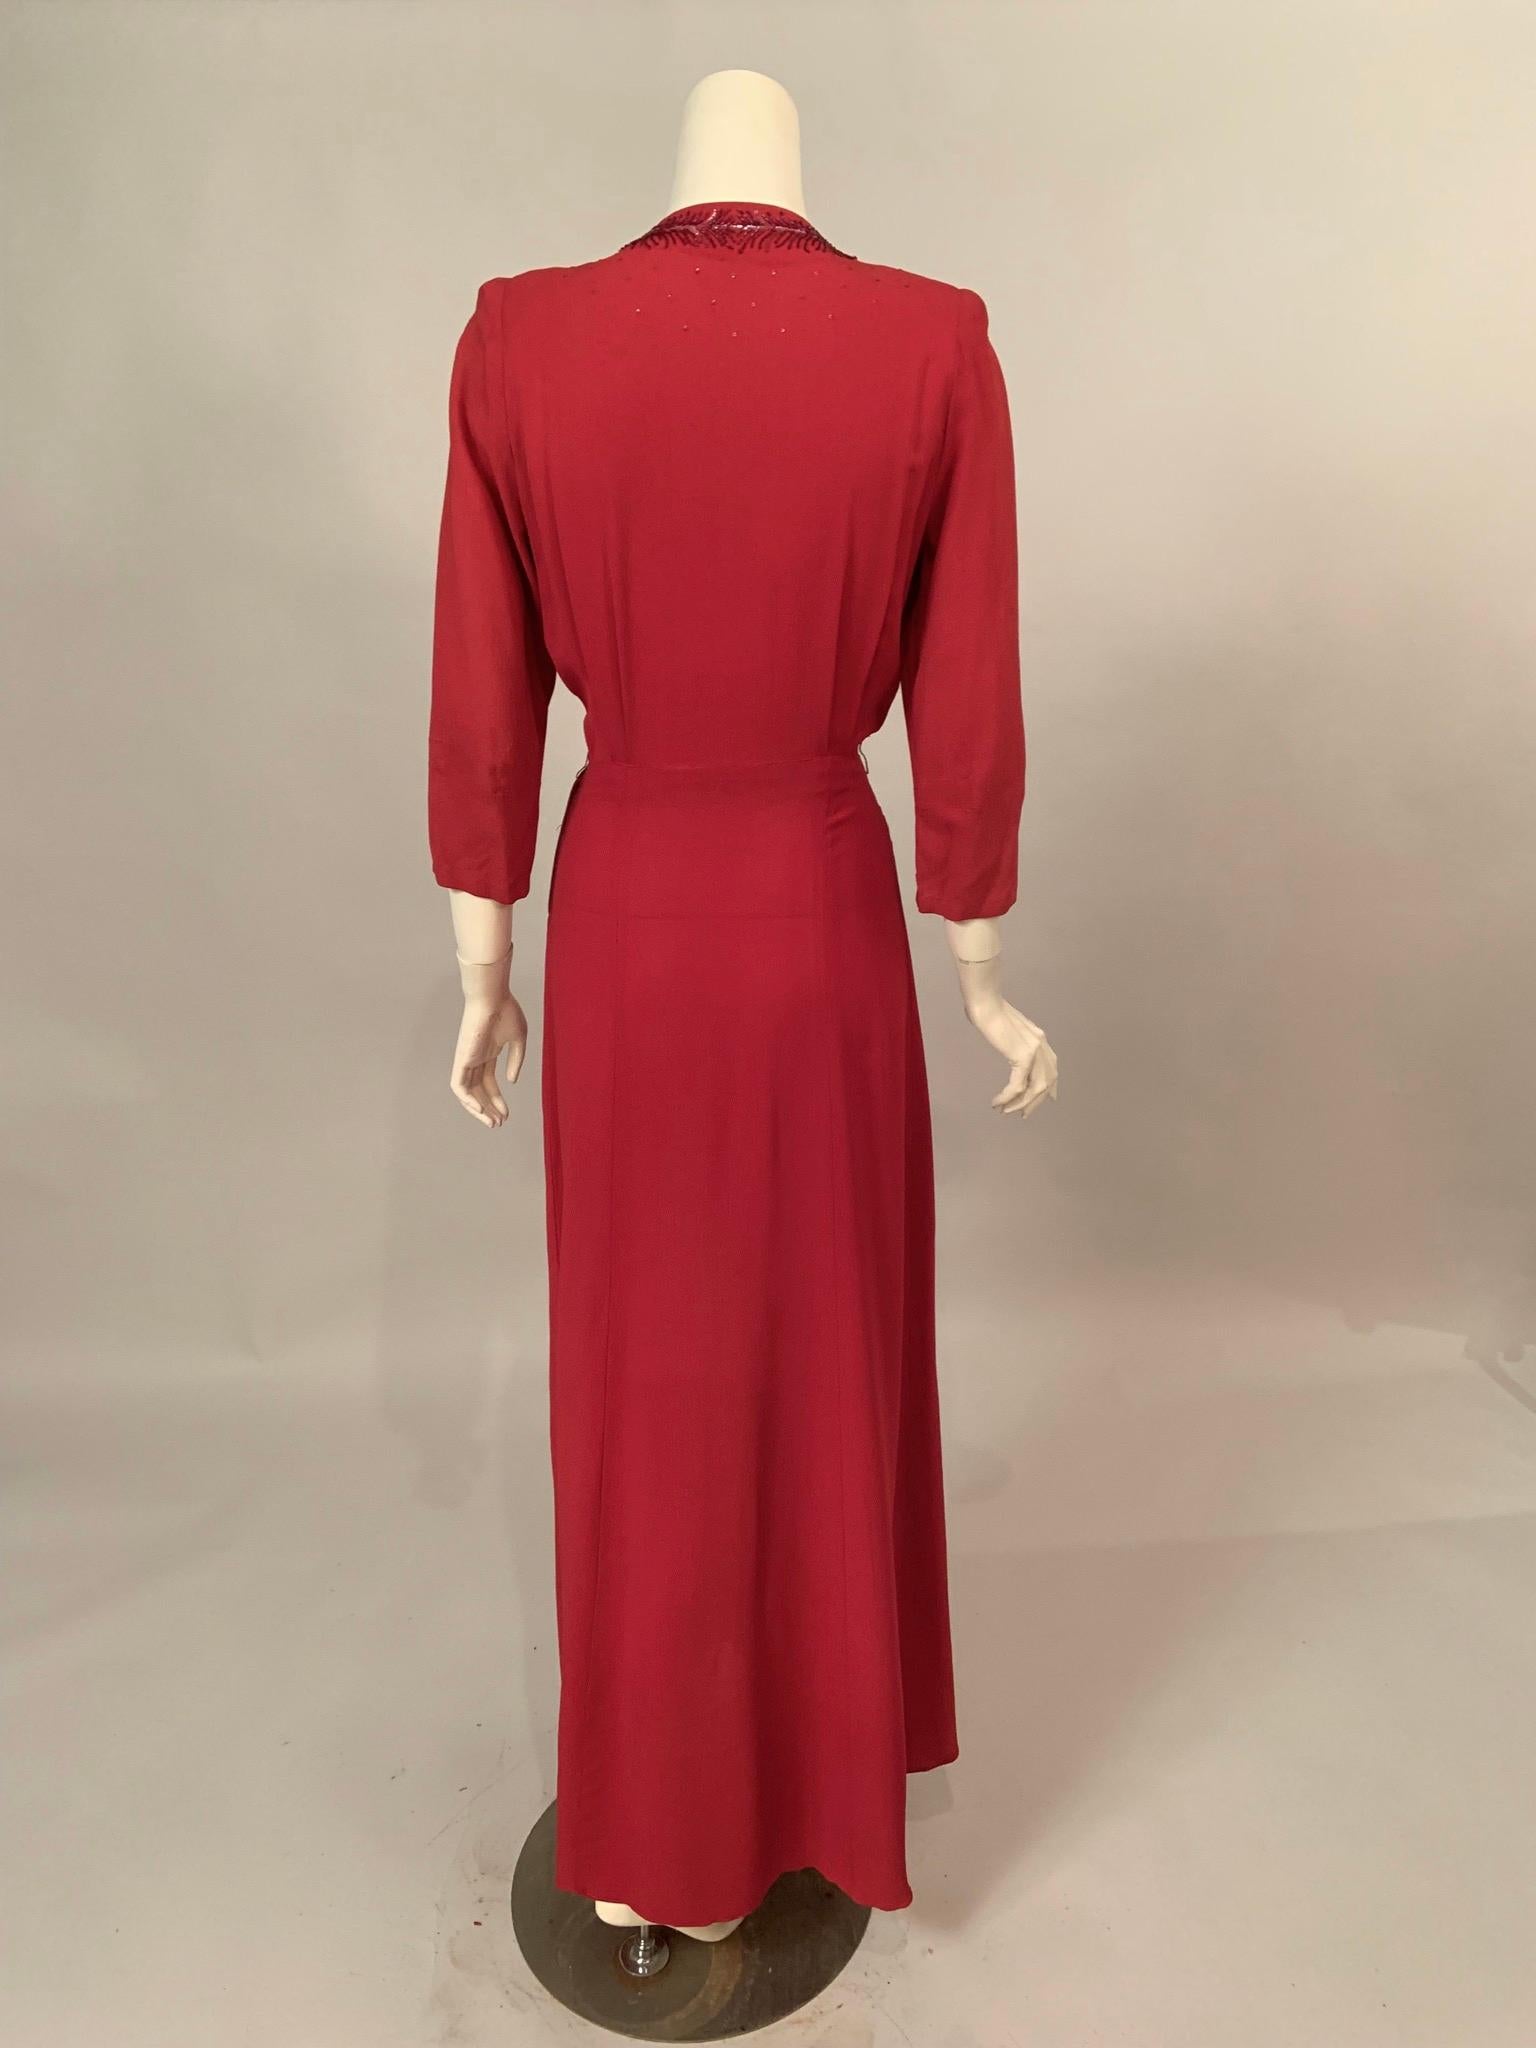 Women's 1940's Ruby Red Crepe Evening Gown with Burgundy Bugle Beaded Bodice